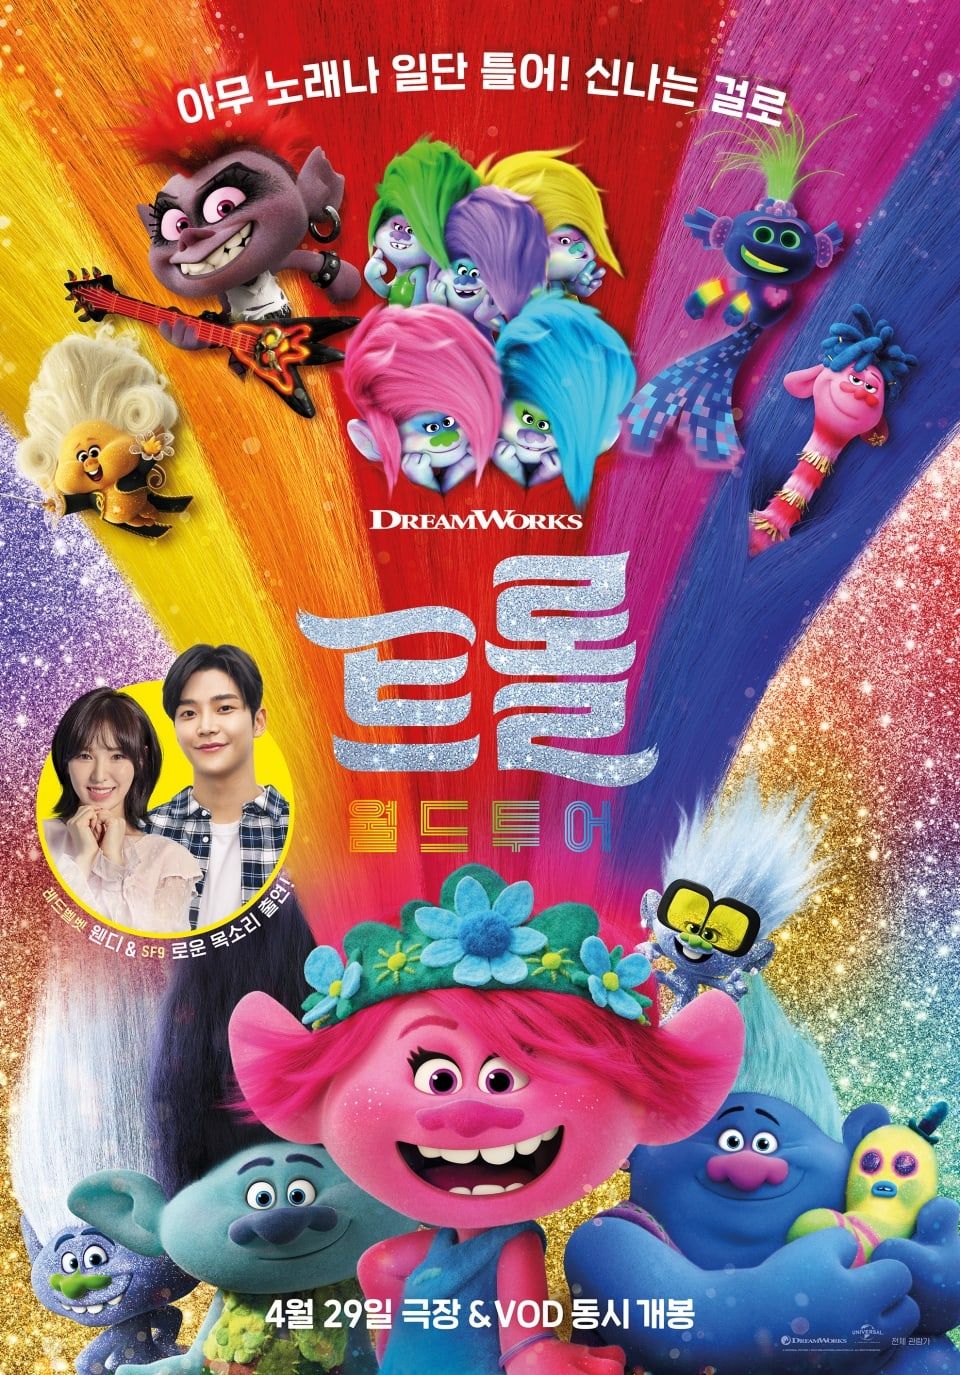 Red Velvet's Wendy And SF9's Rowoon To Lend Their Voices To The Korean Dub Of “Trolls: World Tour”